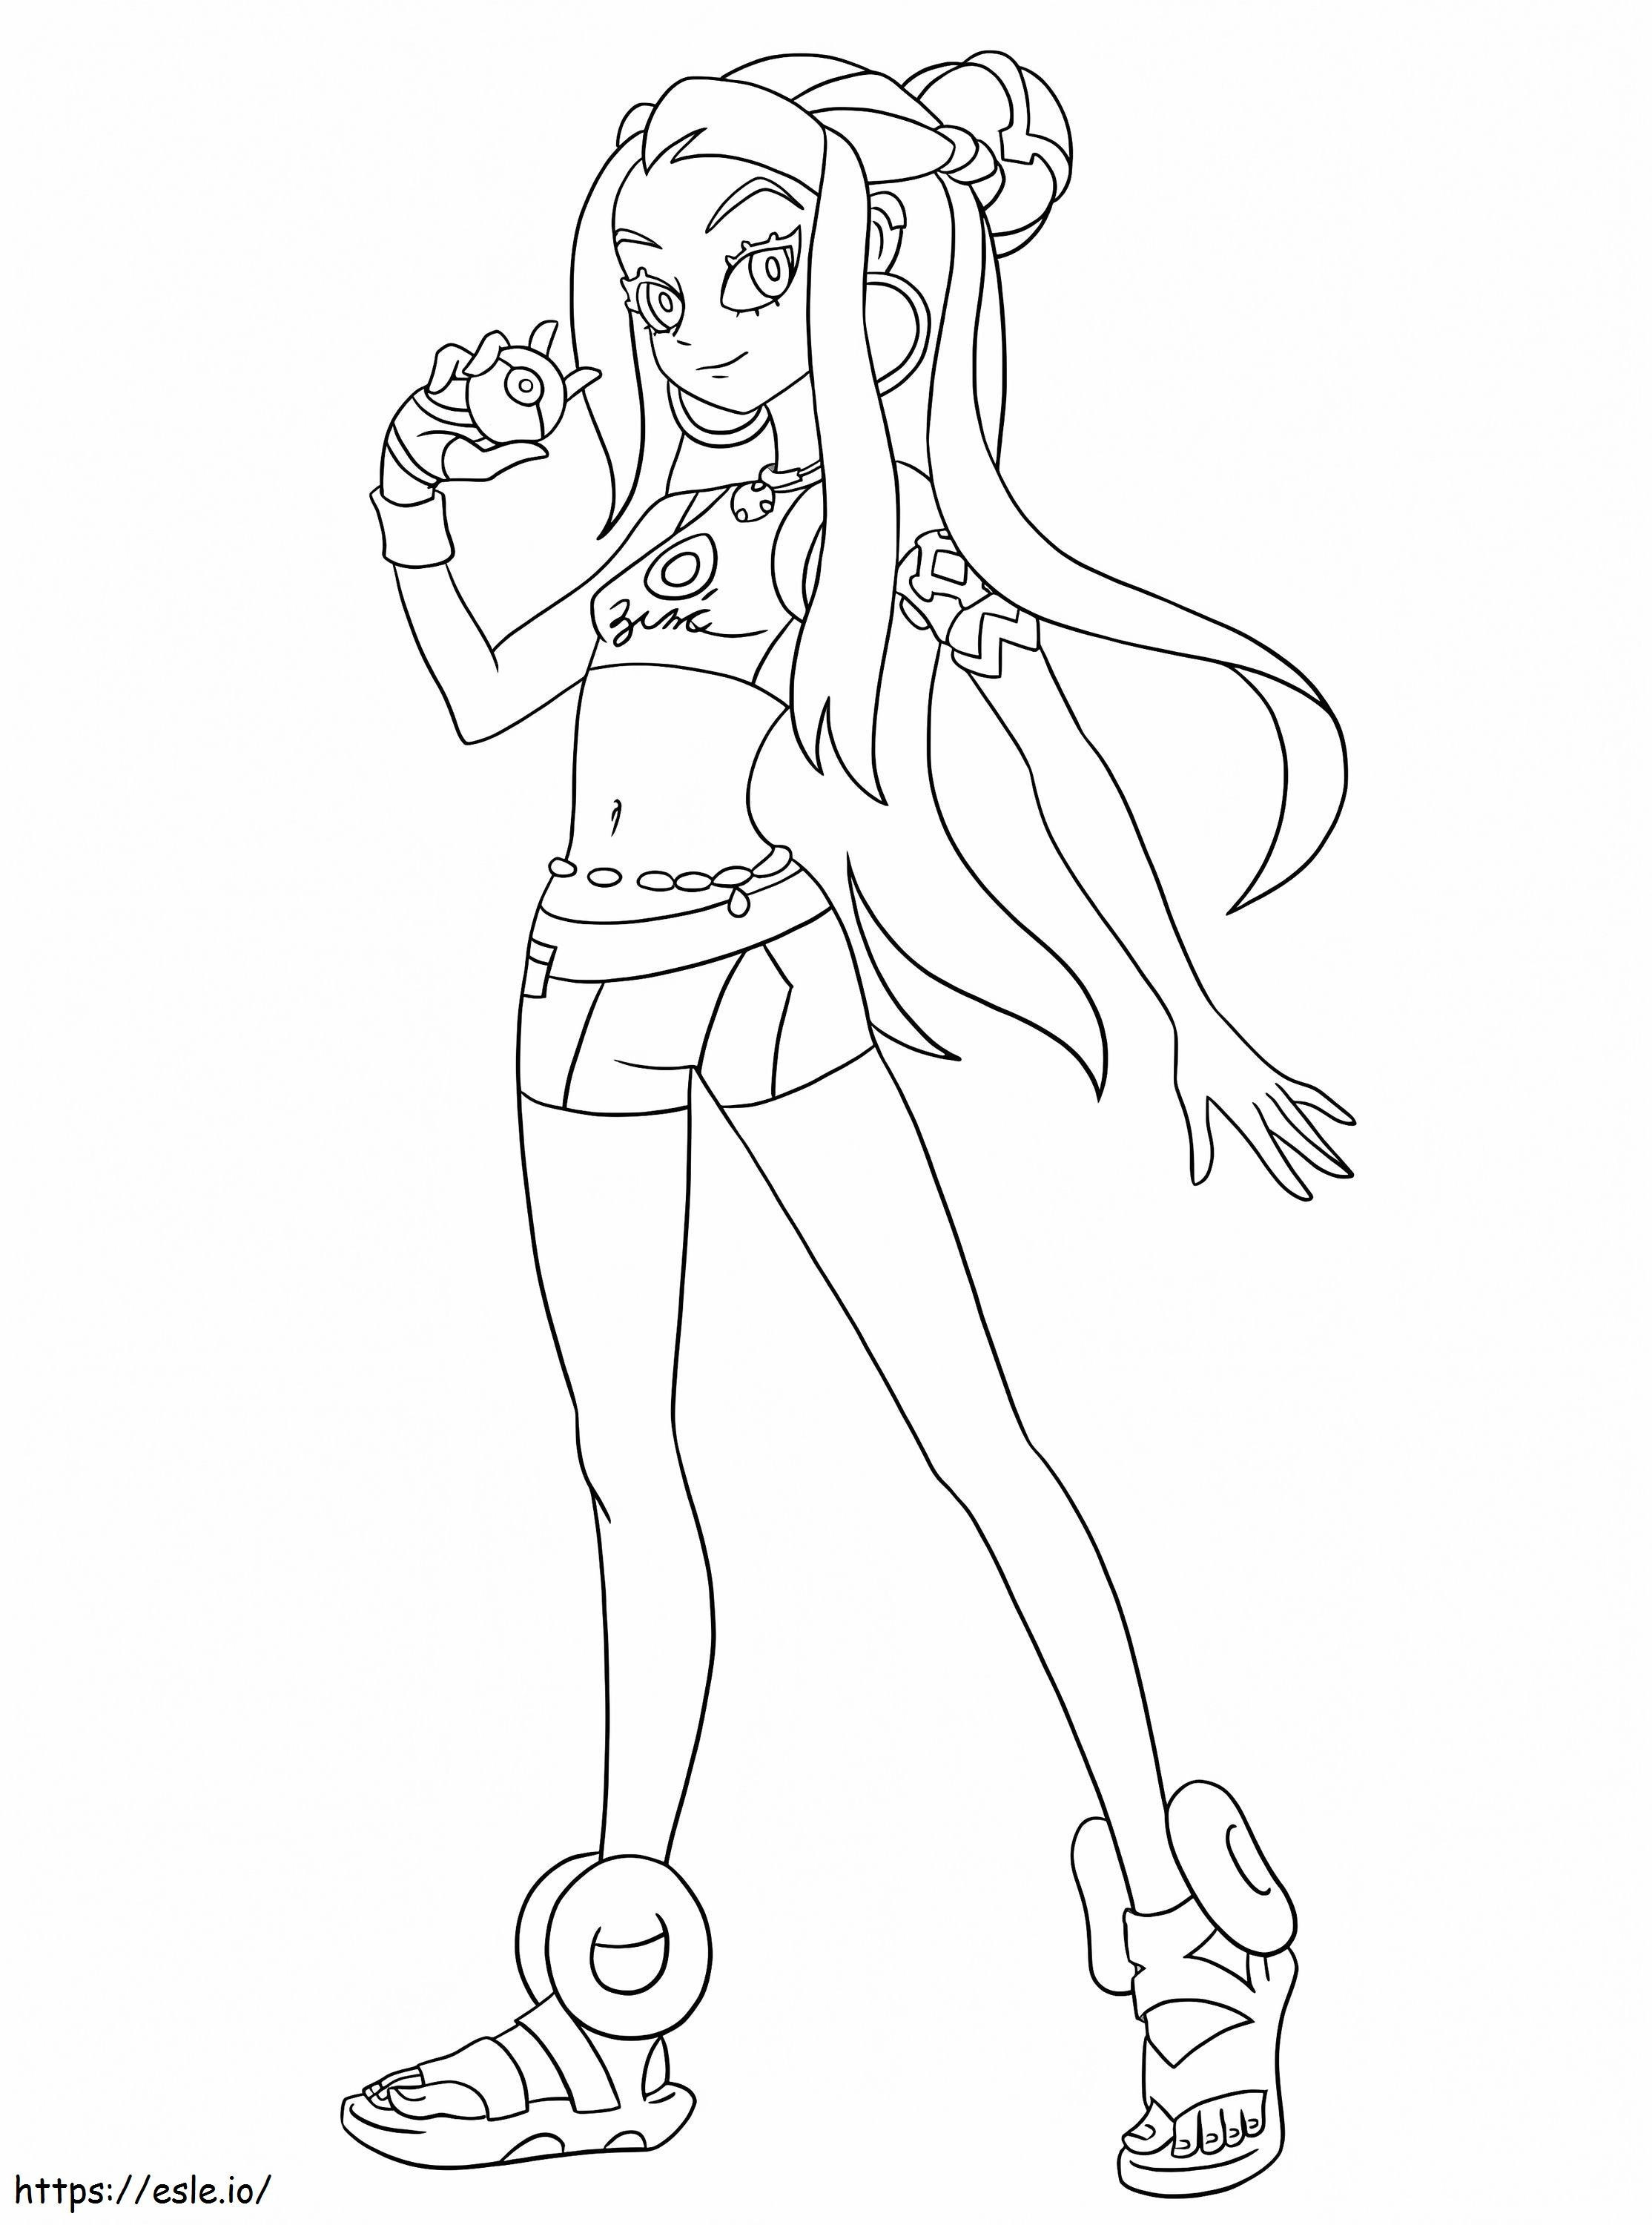 Nessa Pokemon Gym Leader coloring page